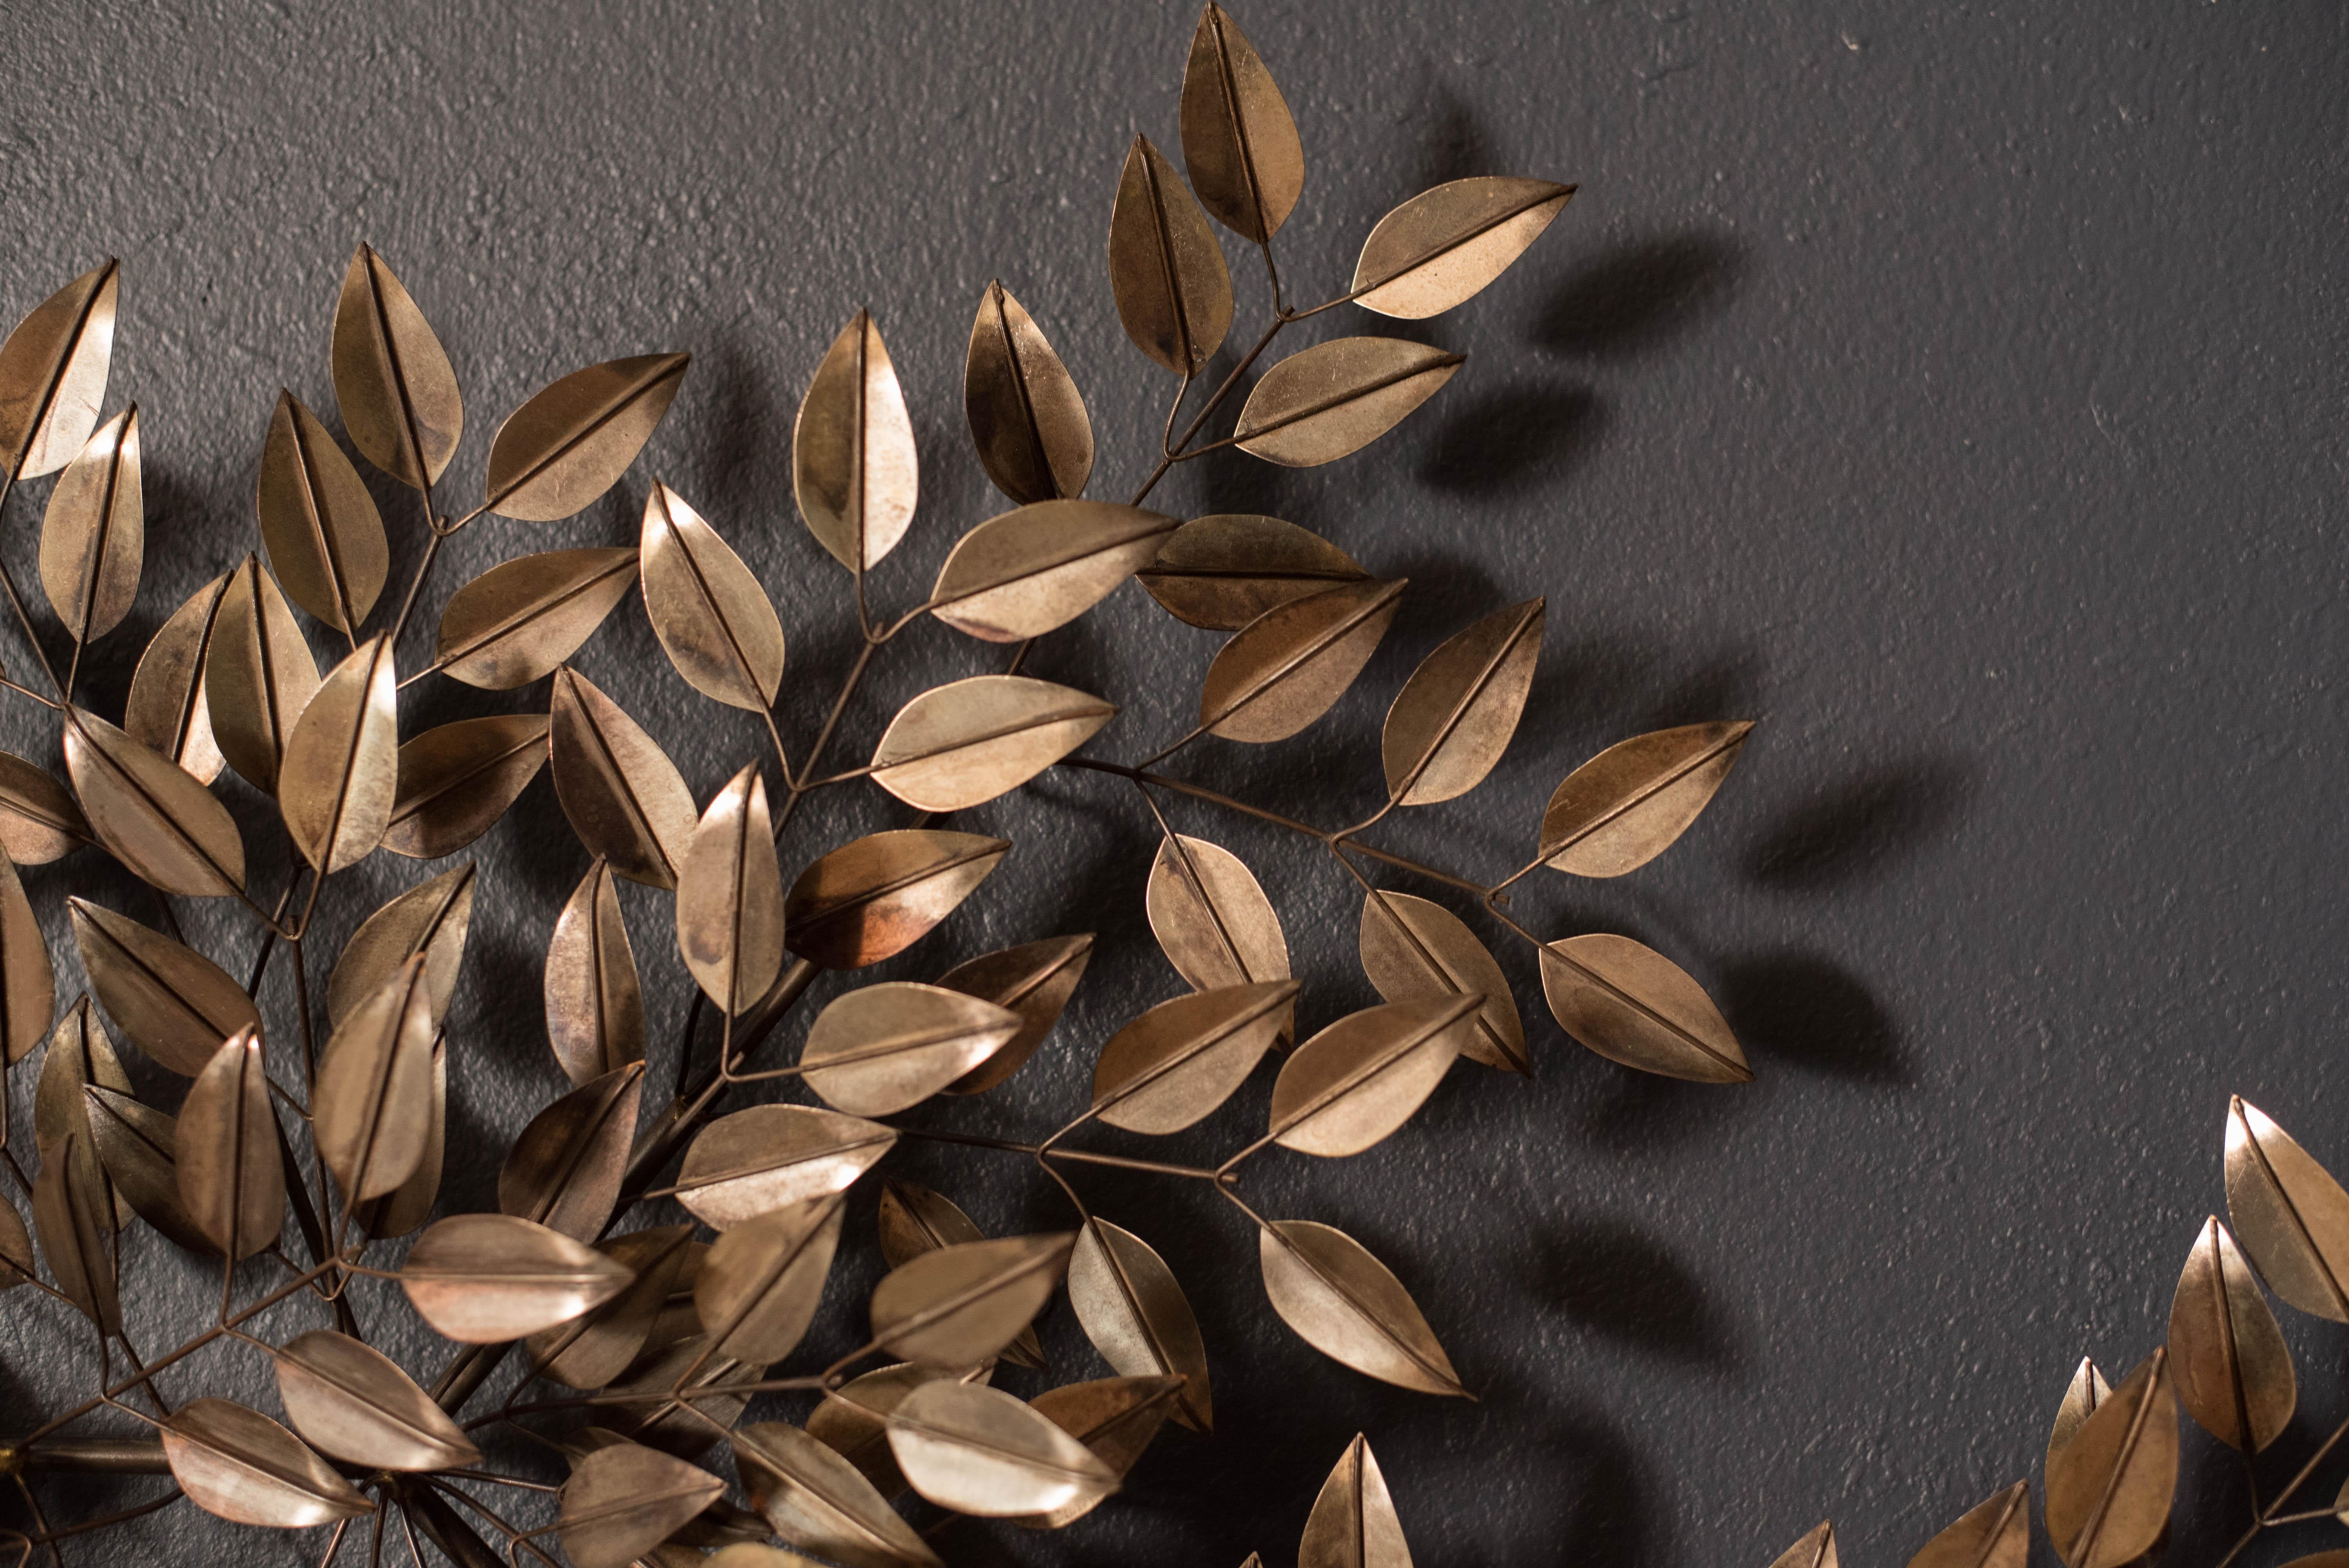 Mid-Century Modern Mid-Century Metal Leaves Wall Art Sculpture by Curtis Jere for Artisan House